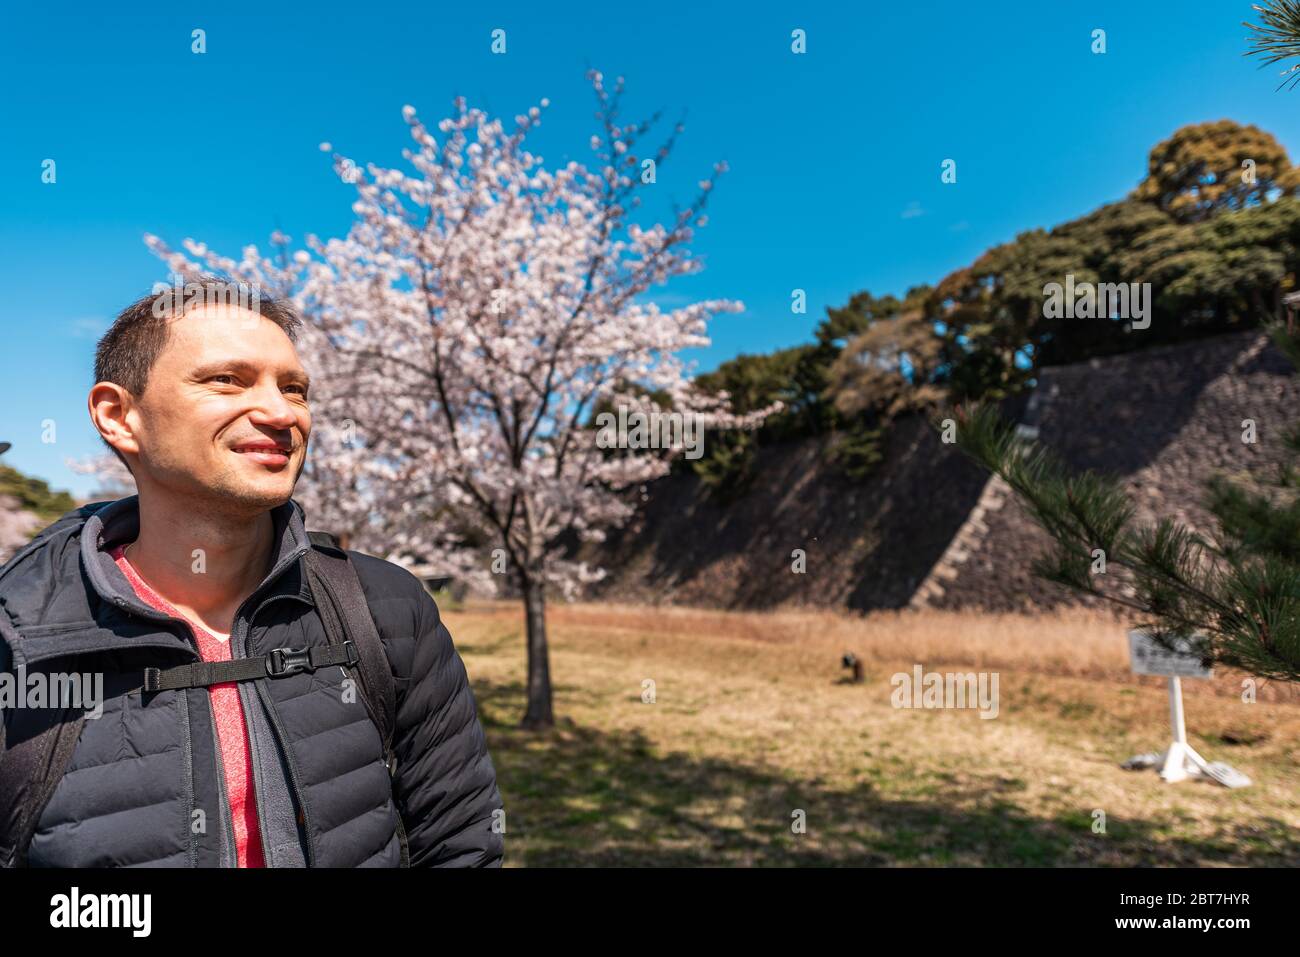 Tokyo, Japan Imperial palace national gardens park with happy tourist foreigner man by cherry blossom sakura flowers trees and wall Stock Photo